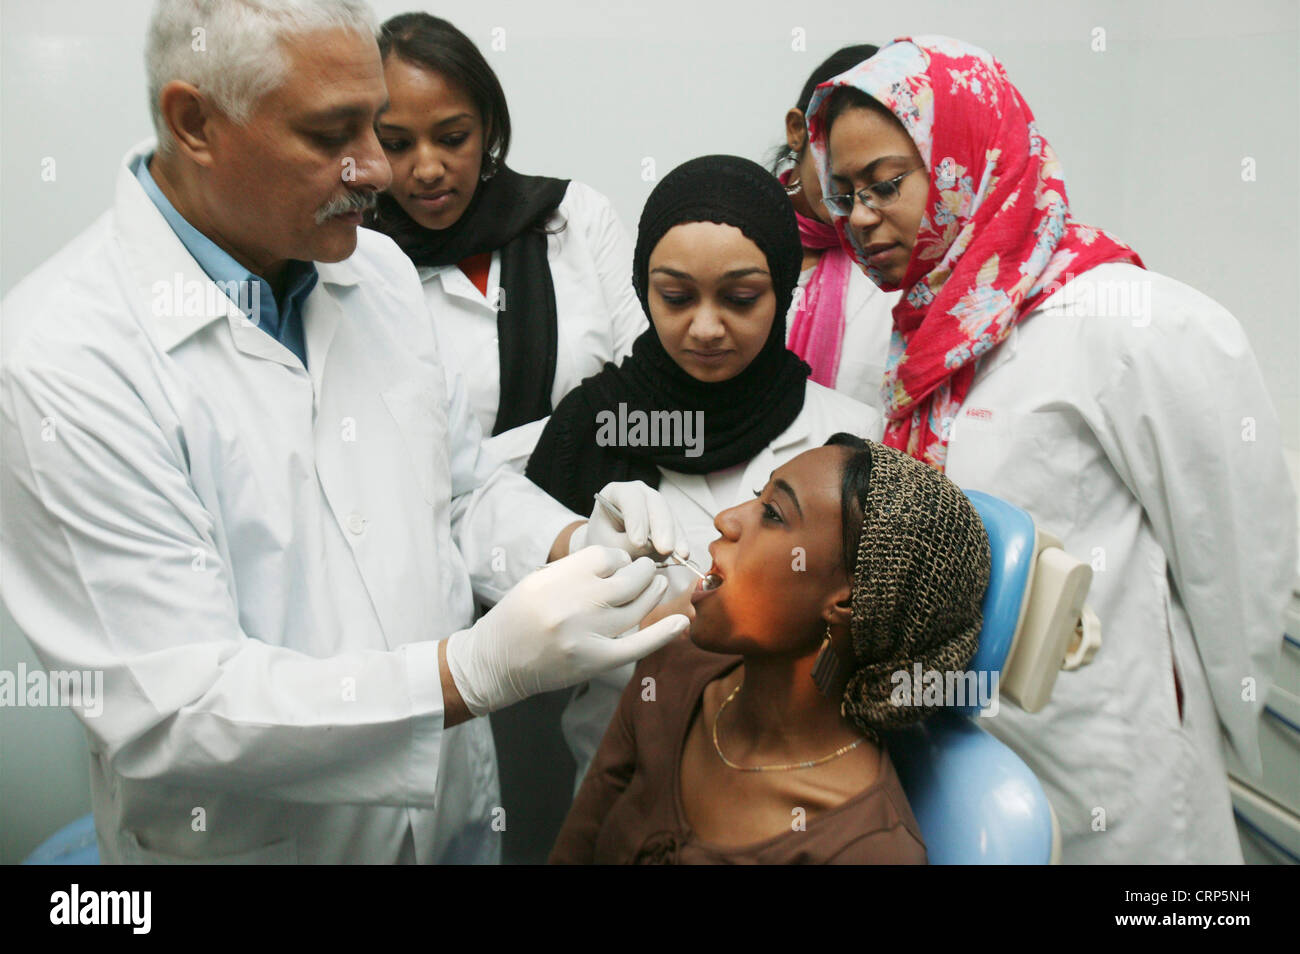 Dental students are gathering around the teacher to take part in a practical lesson. Stock Photo